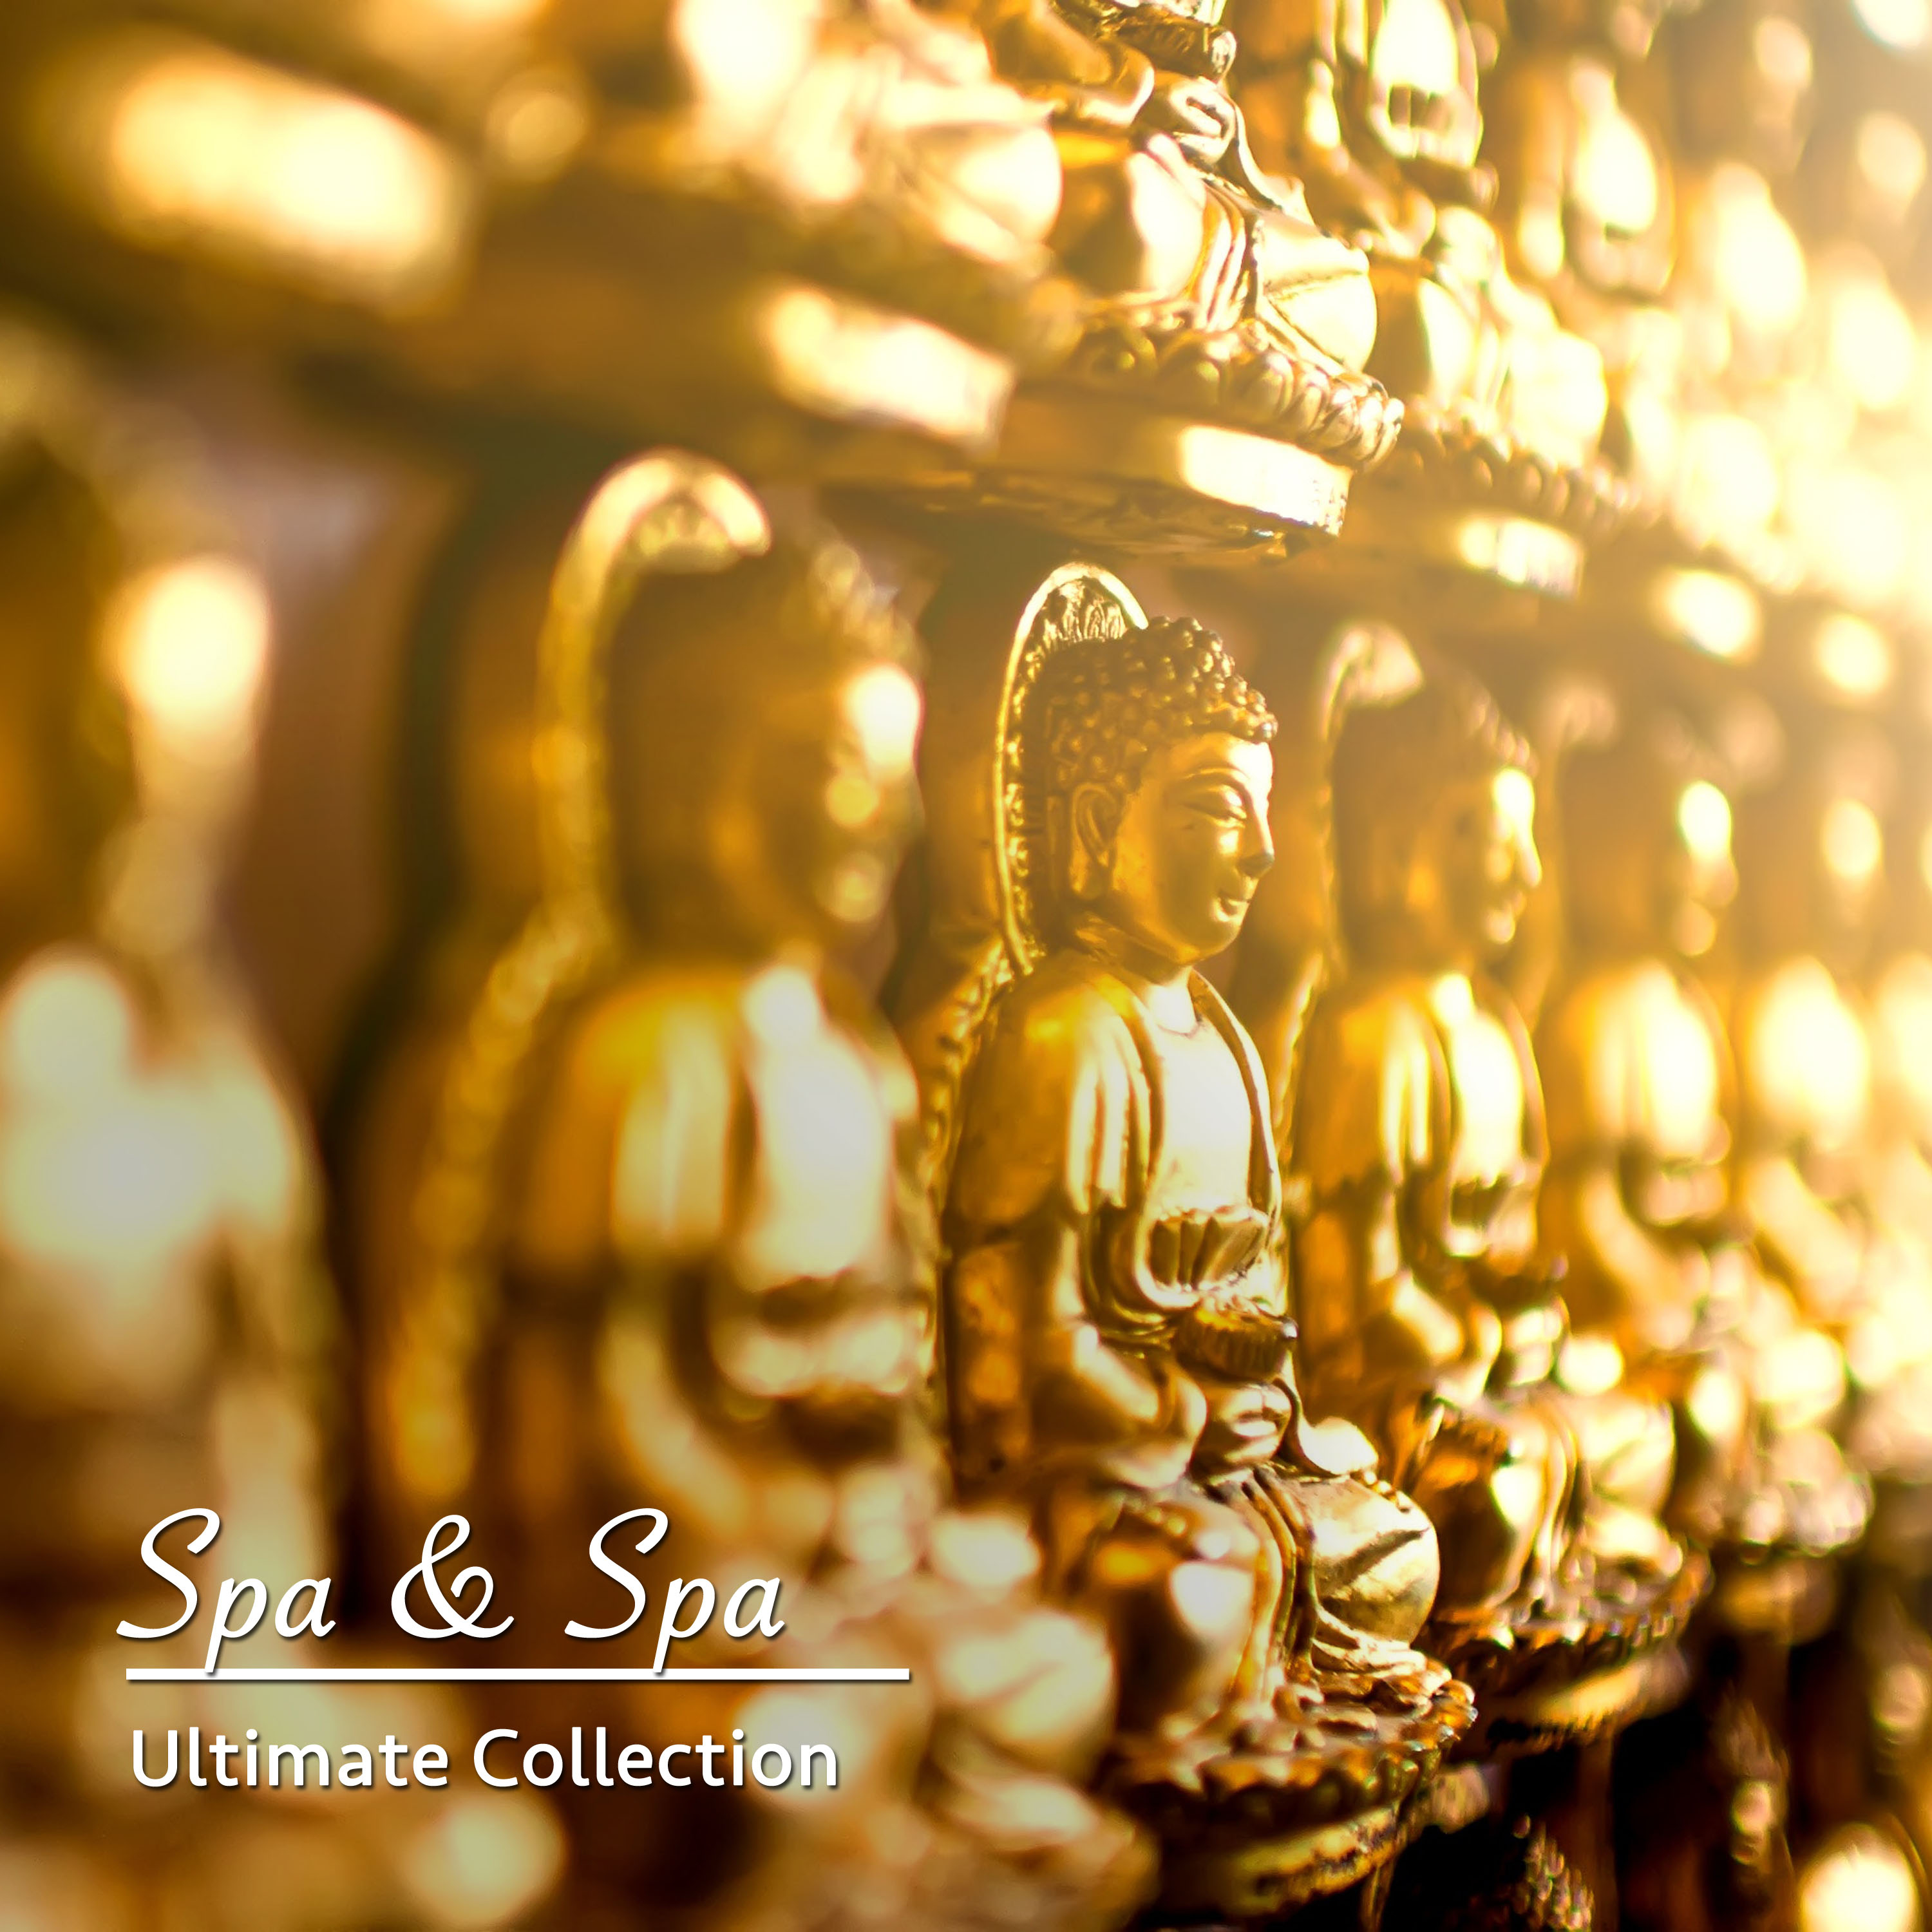 16 Spa & Spa: Ultimate Collection